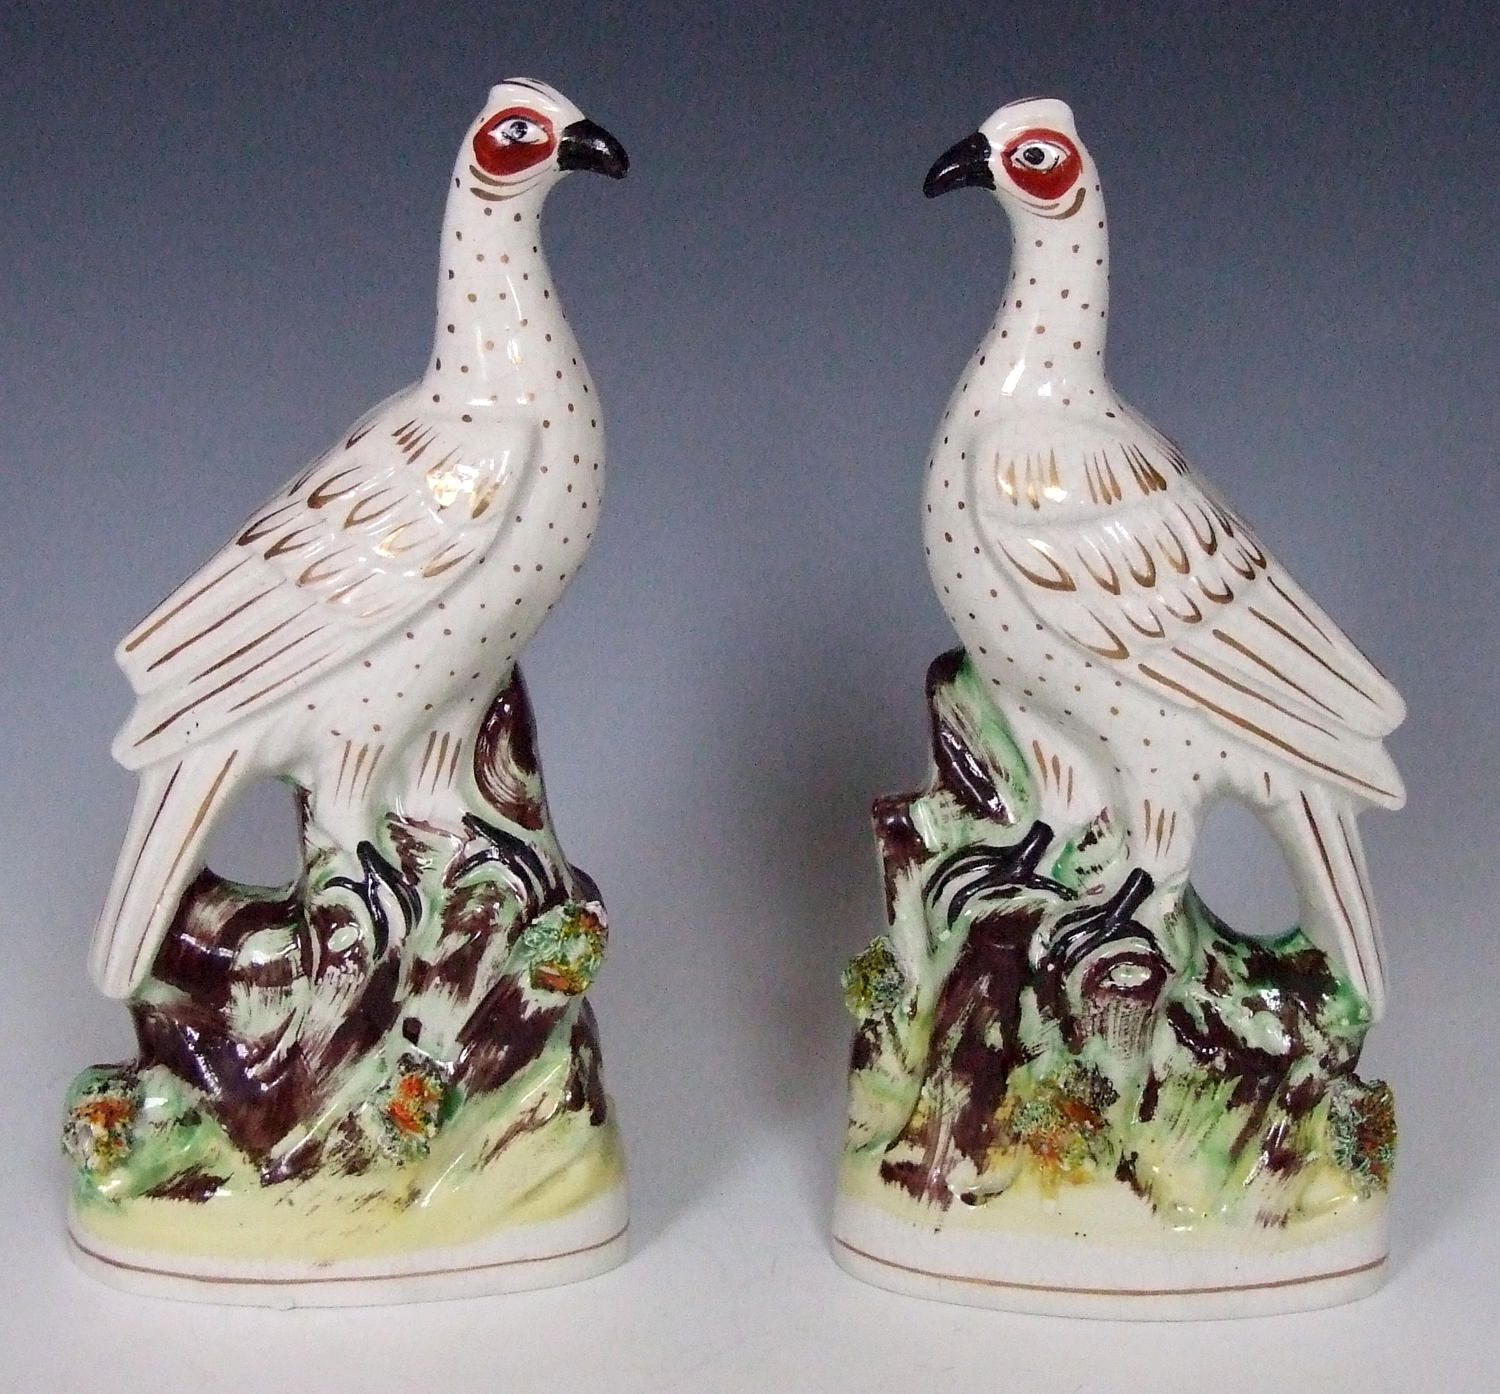 fine-pair-of-gilt-and-white-staffordshire-bird-figures-_10357_main_size3.jpg